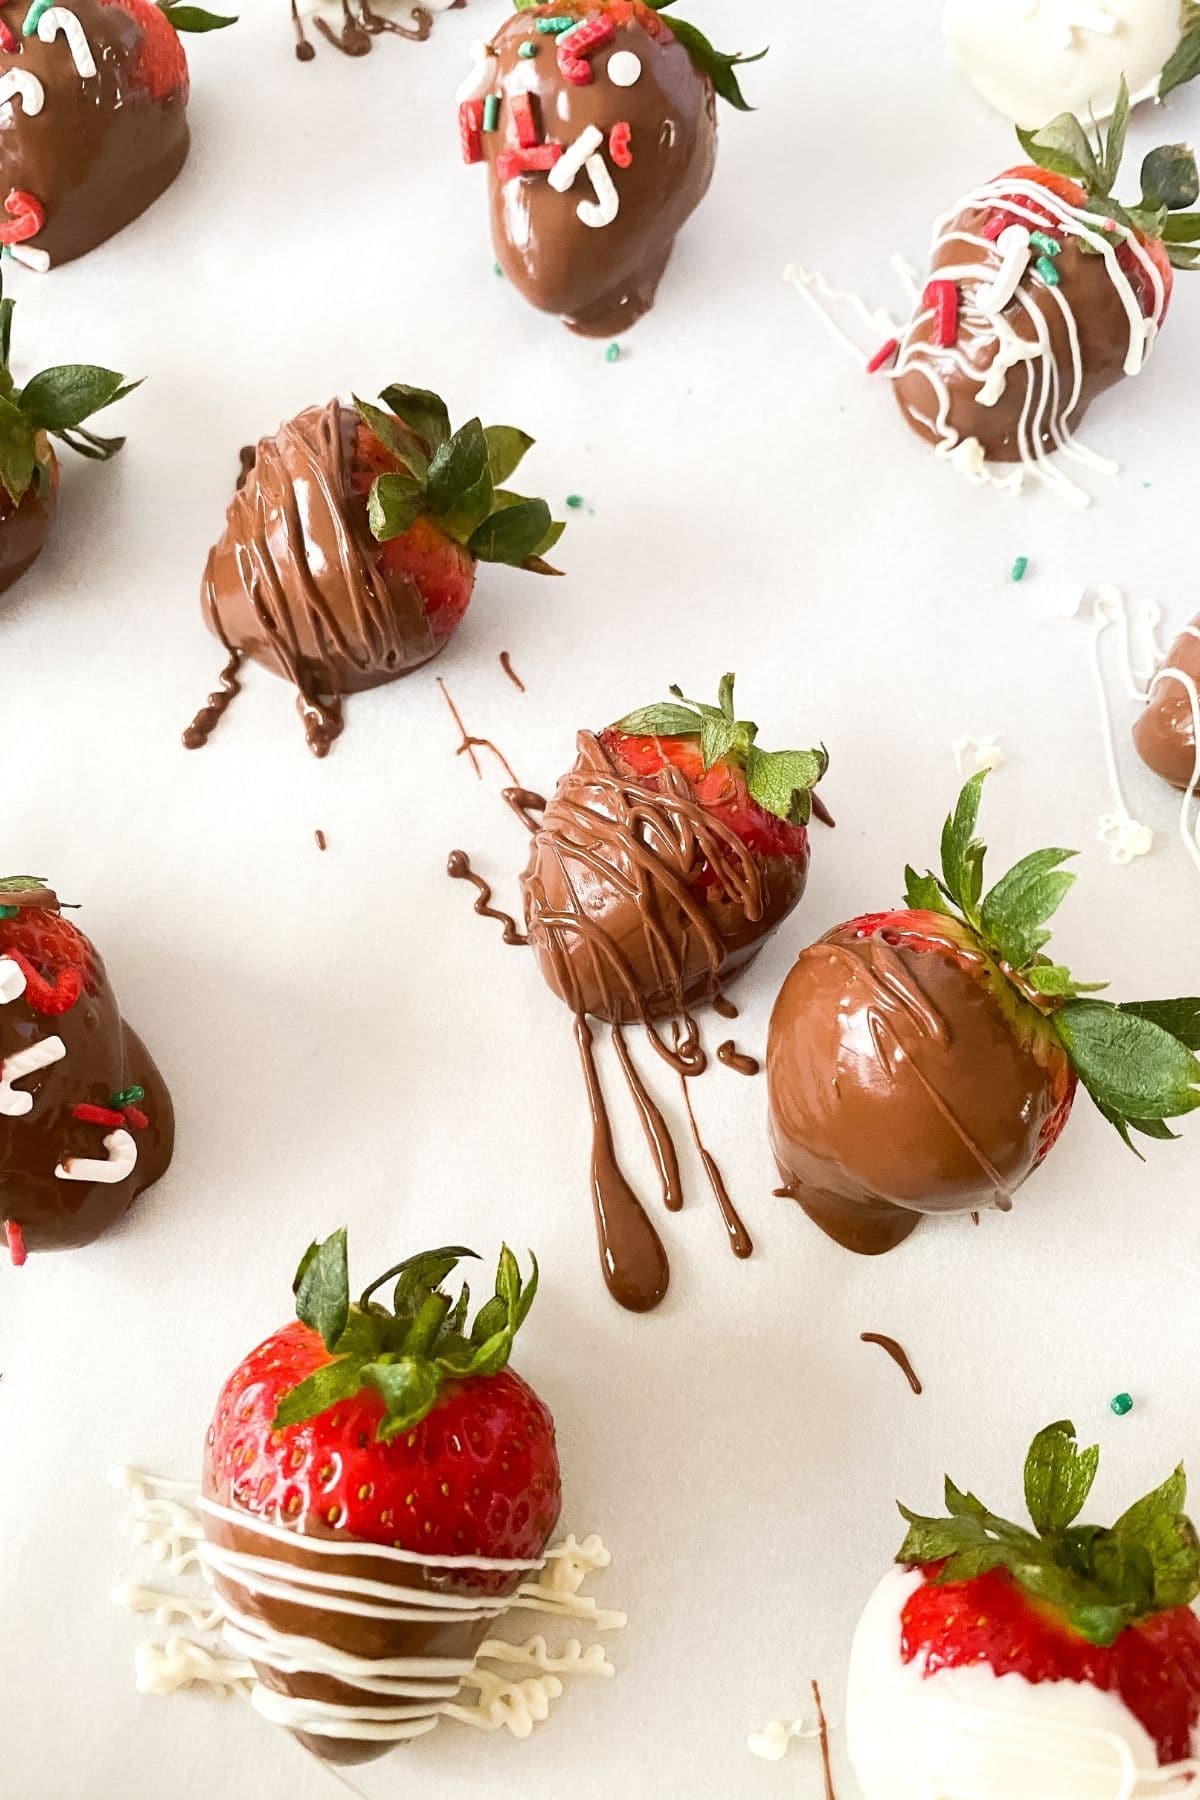 Adding toppings on chocolate strawberries